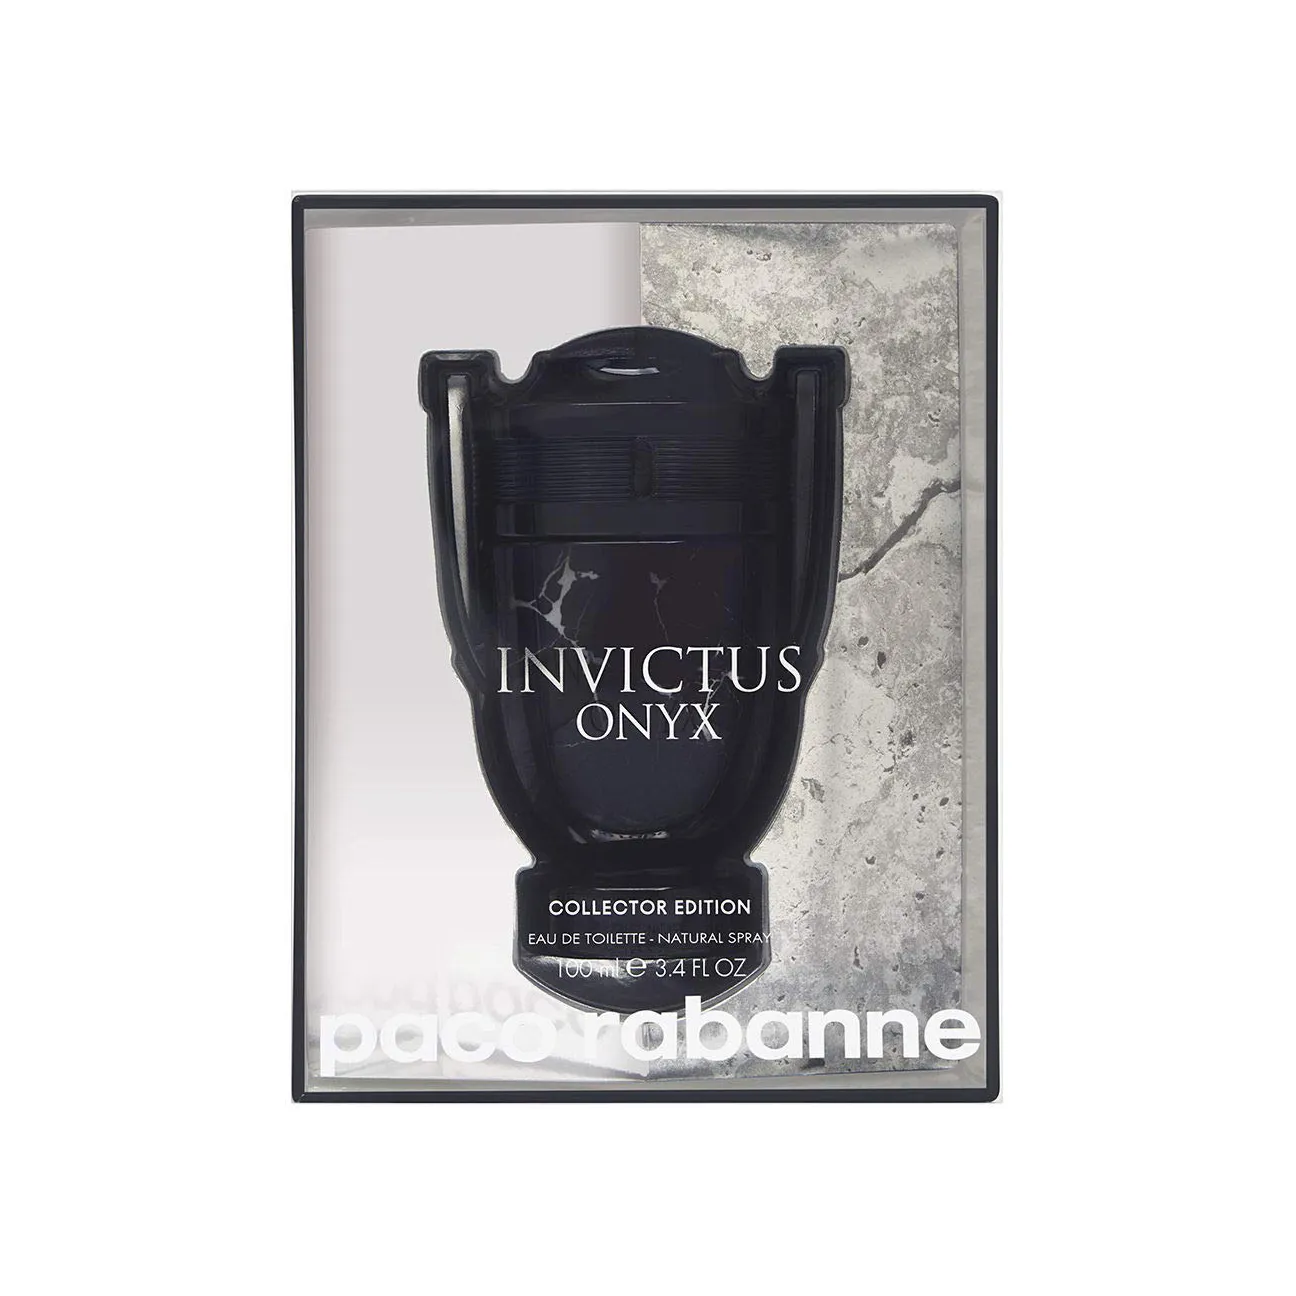 PACO RABANNE INVICTUS ONYX COLLECTOR EDITION EDT FOR MEN | atelier-yuwa ...